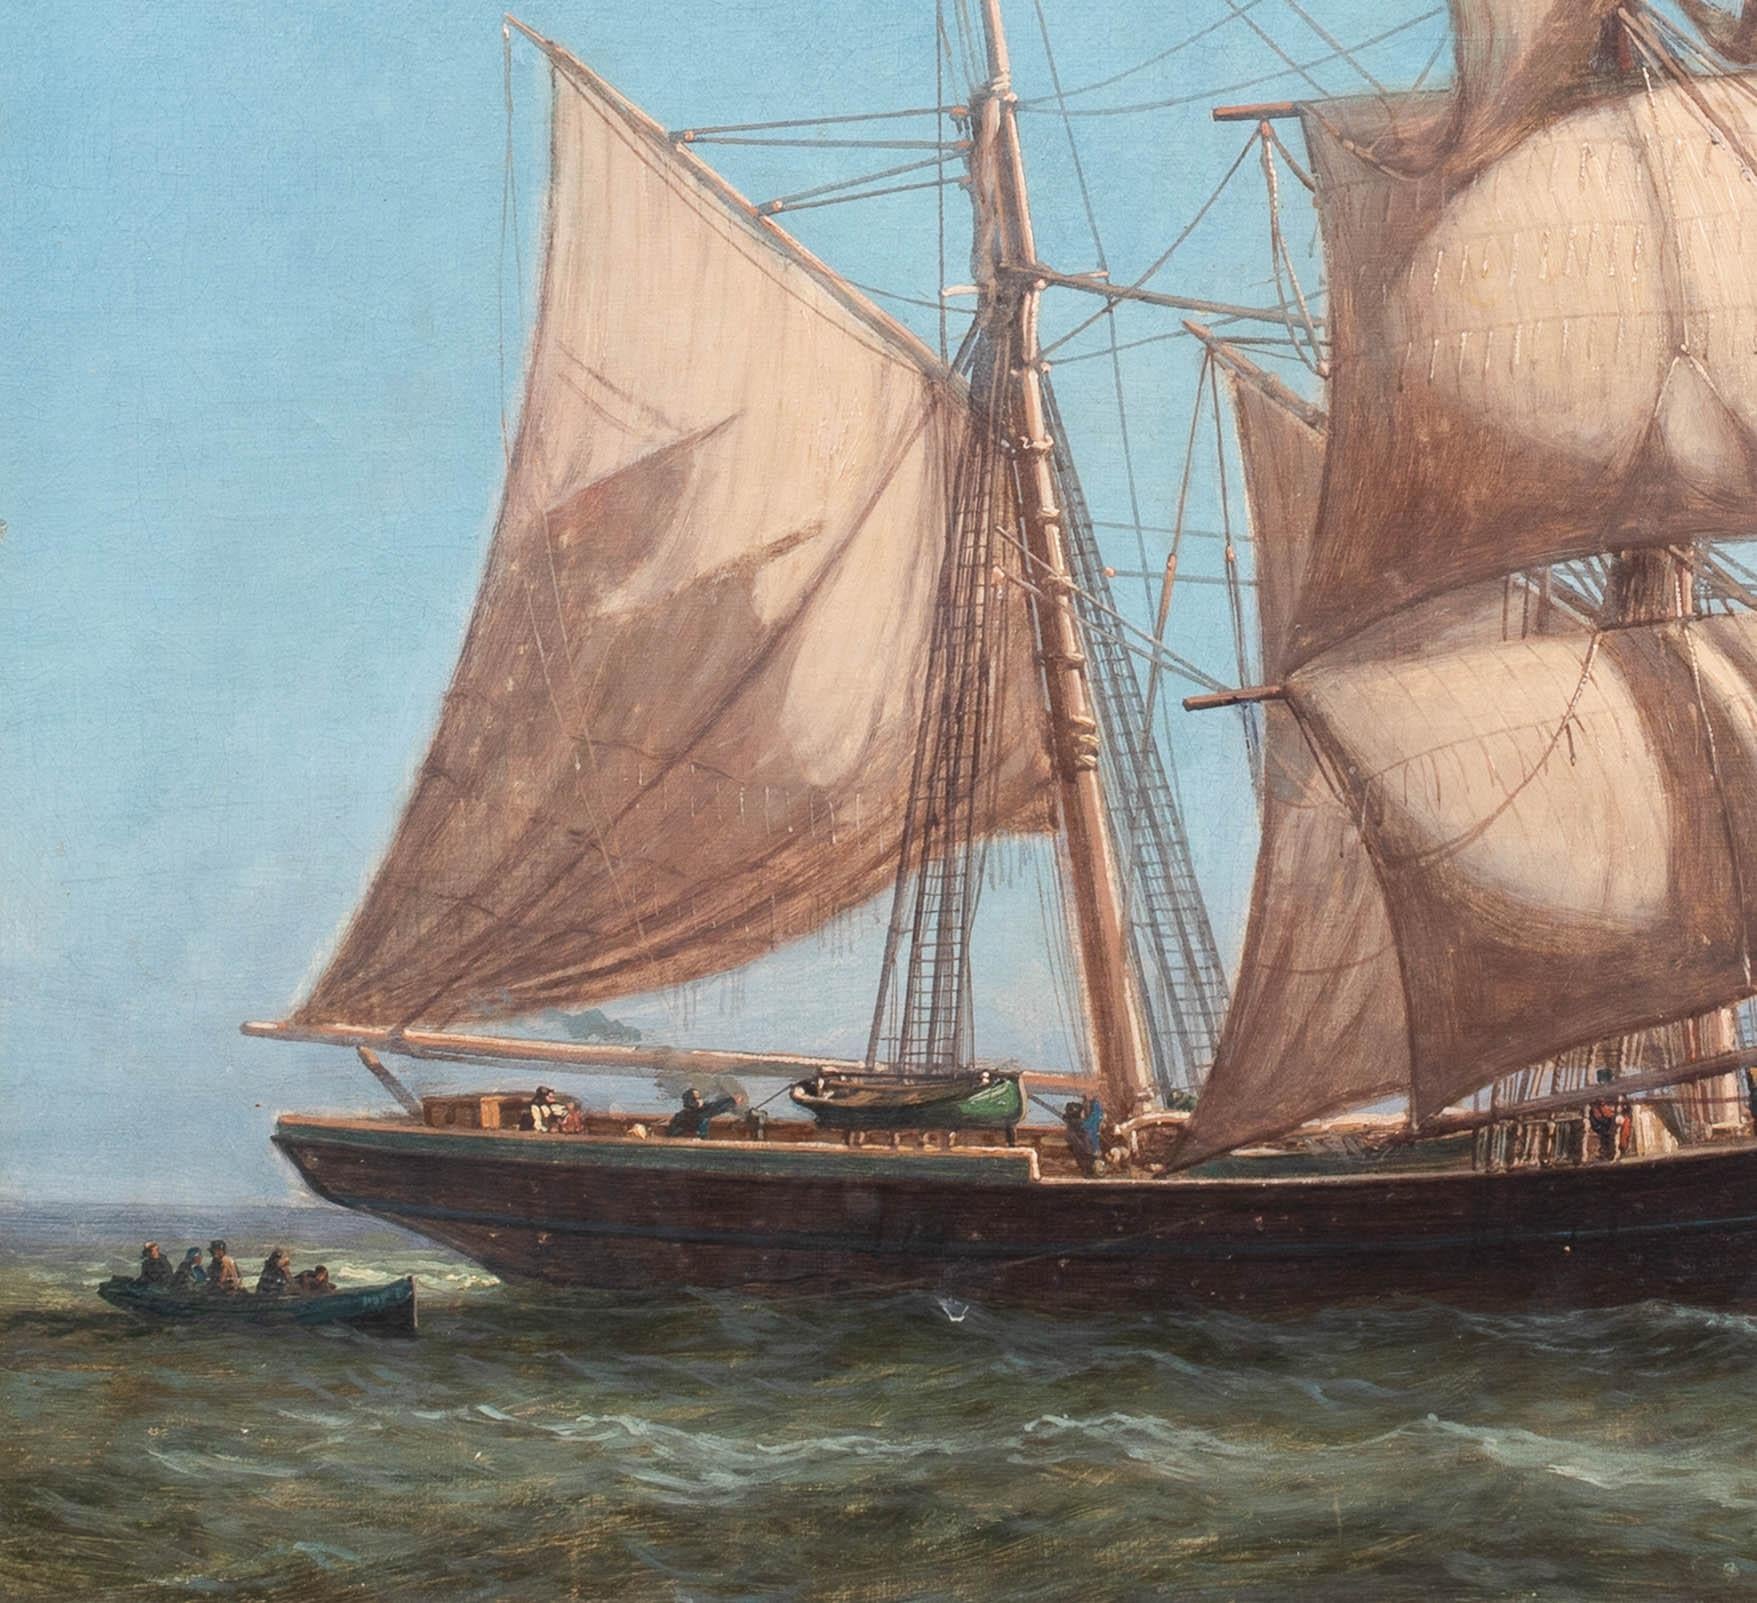 British Schooner Ship Entering Jersey / Guernsey Harbour Port, 19th Century

British School

19th Century Marine Oil study of a British Schooner entering the harbour of Jersey/Guernsey, oil on board. Excellent quality and condition, unsigned by the